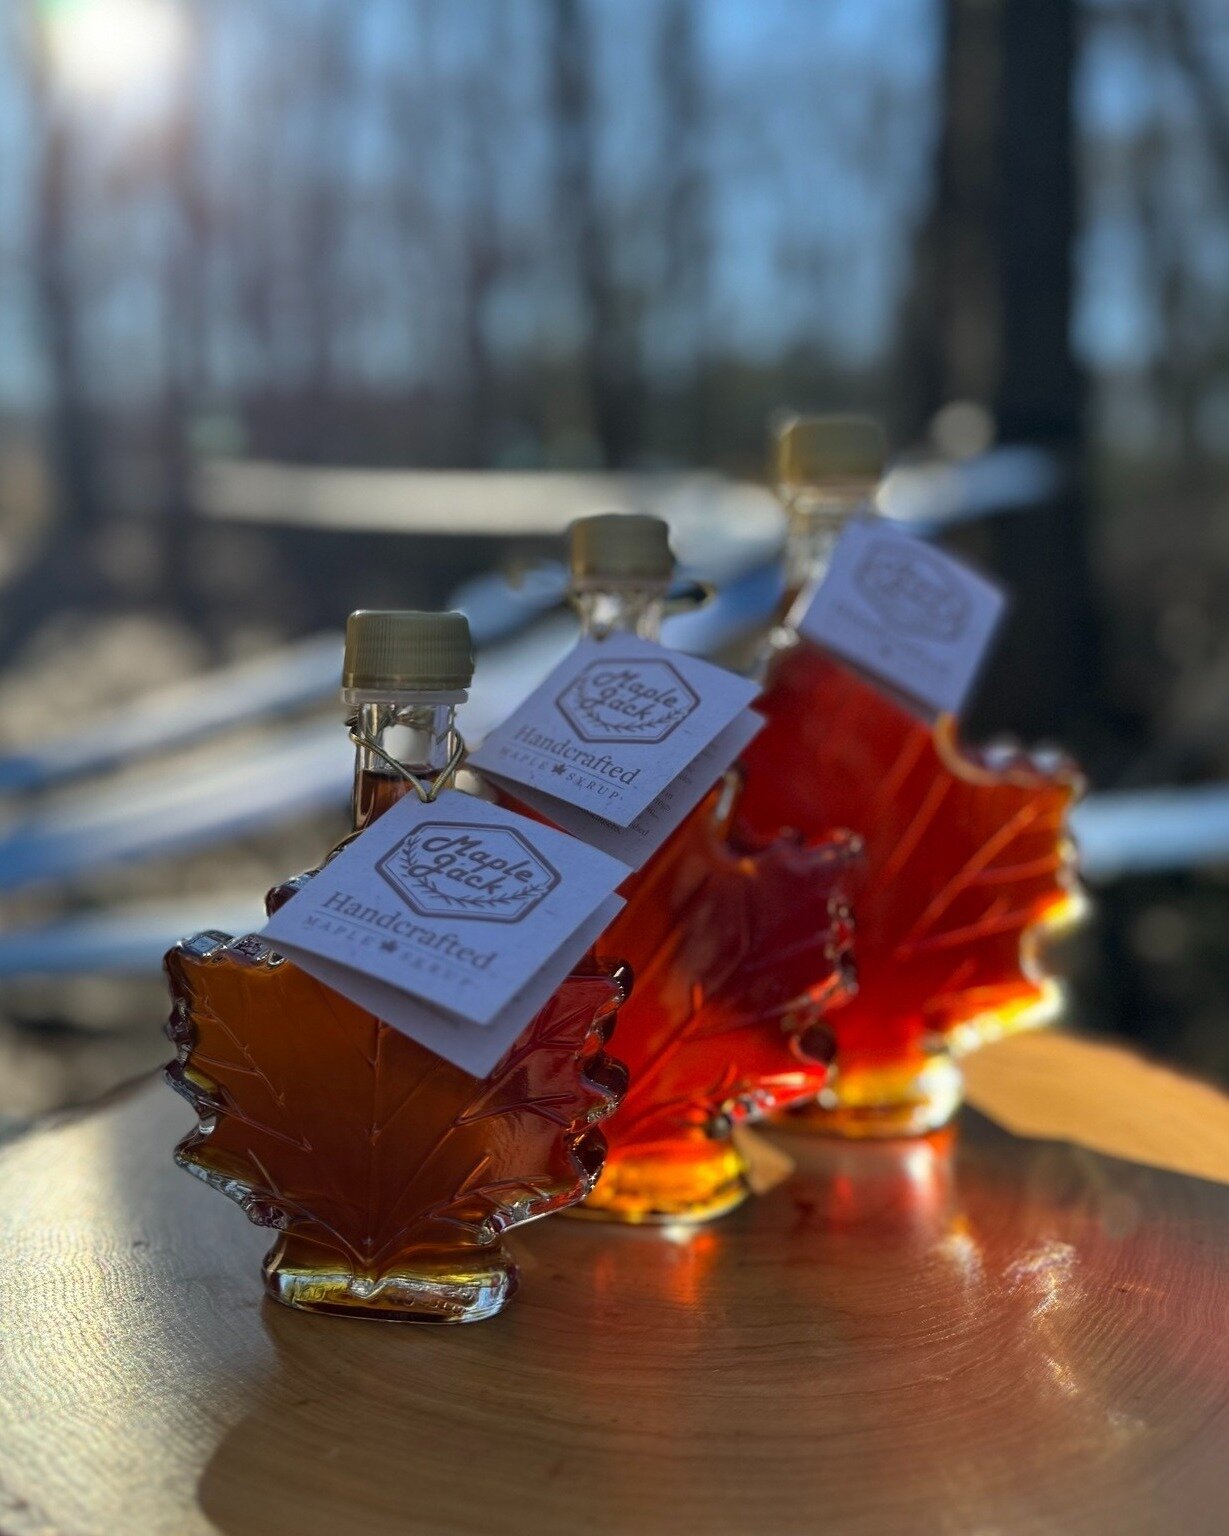 Maple Leaf Bottles Are back! 

Everyone's favorite bottles have finally made a comeback and they are here to stay!

🍁🍁🍁

#maplesyrup #puremaplesyrup #maplesyrupseason #realmaplesyrup #maplesyrupfestival #organicmaplesyrup #baconandmaplesyrup #mapl